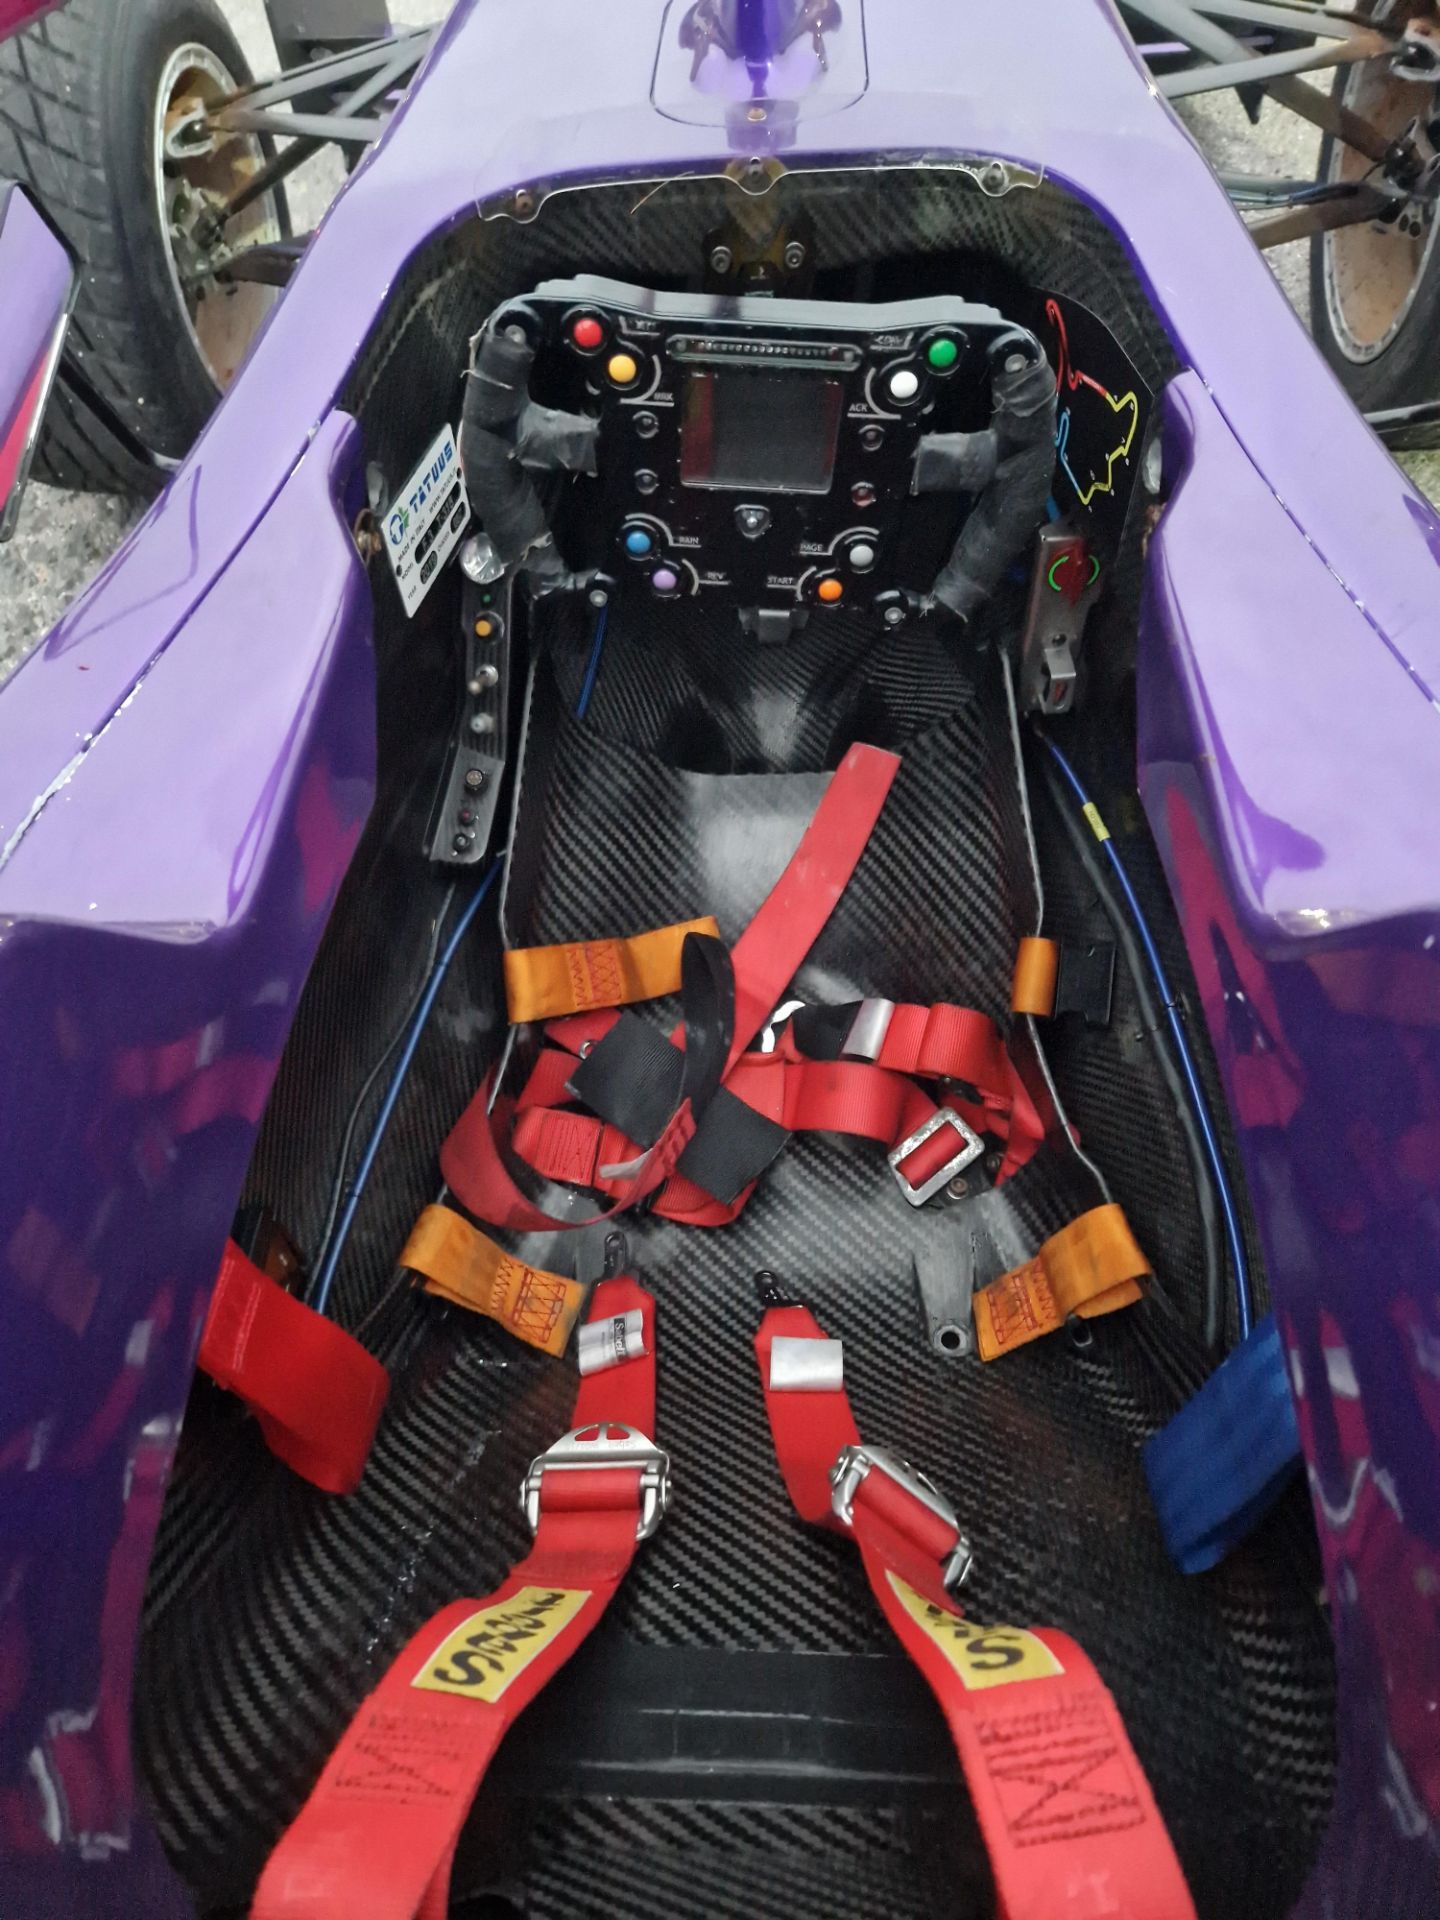 One TATUUS F3 T-318 Alfa Romeo Race Car Chassis No. 057 (2019) Finished in the W Series Academy - Image 5 of 7